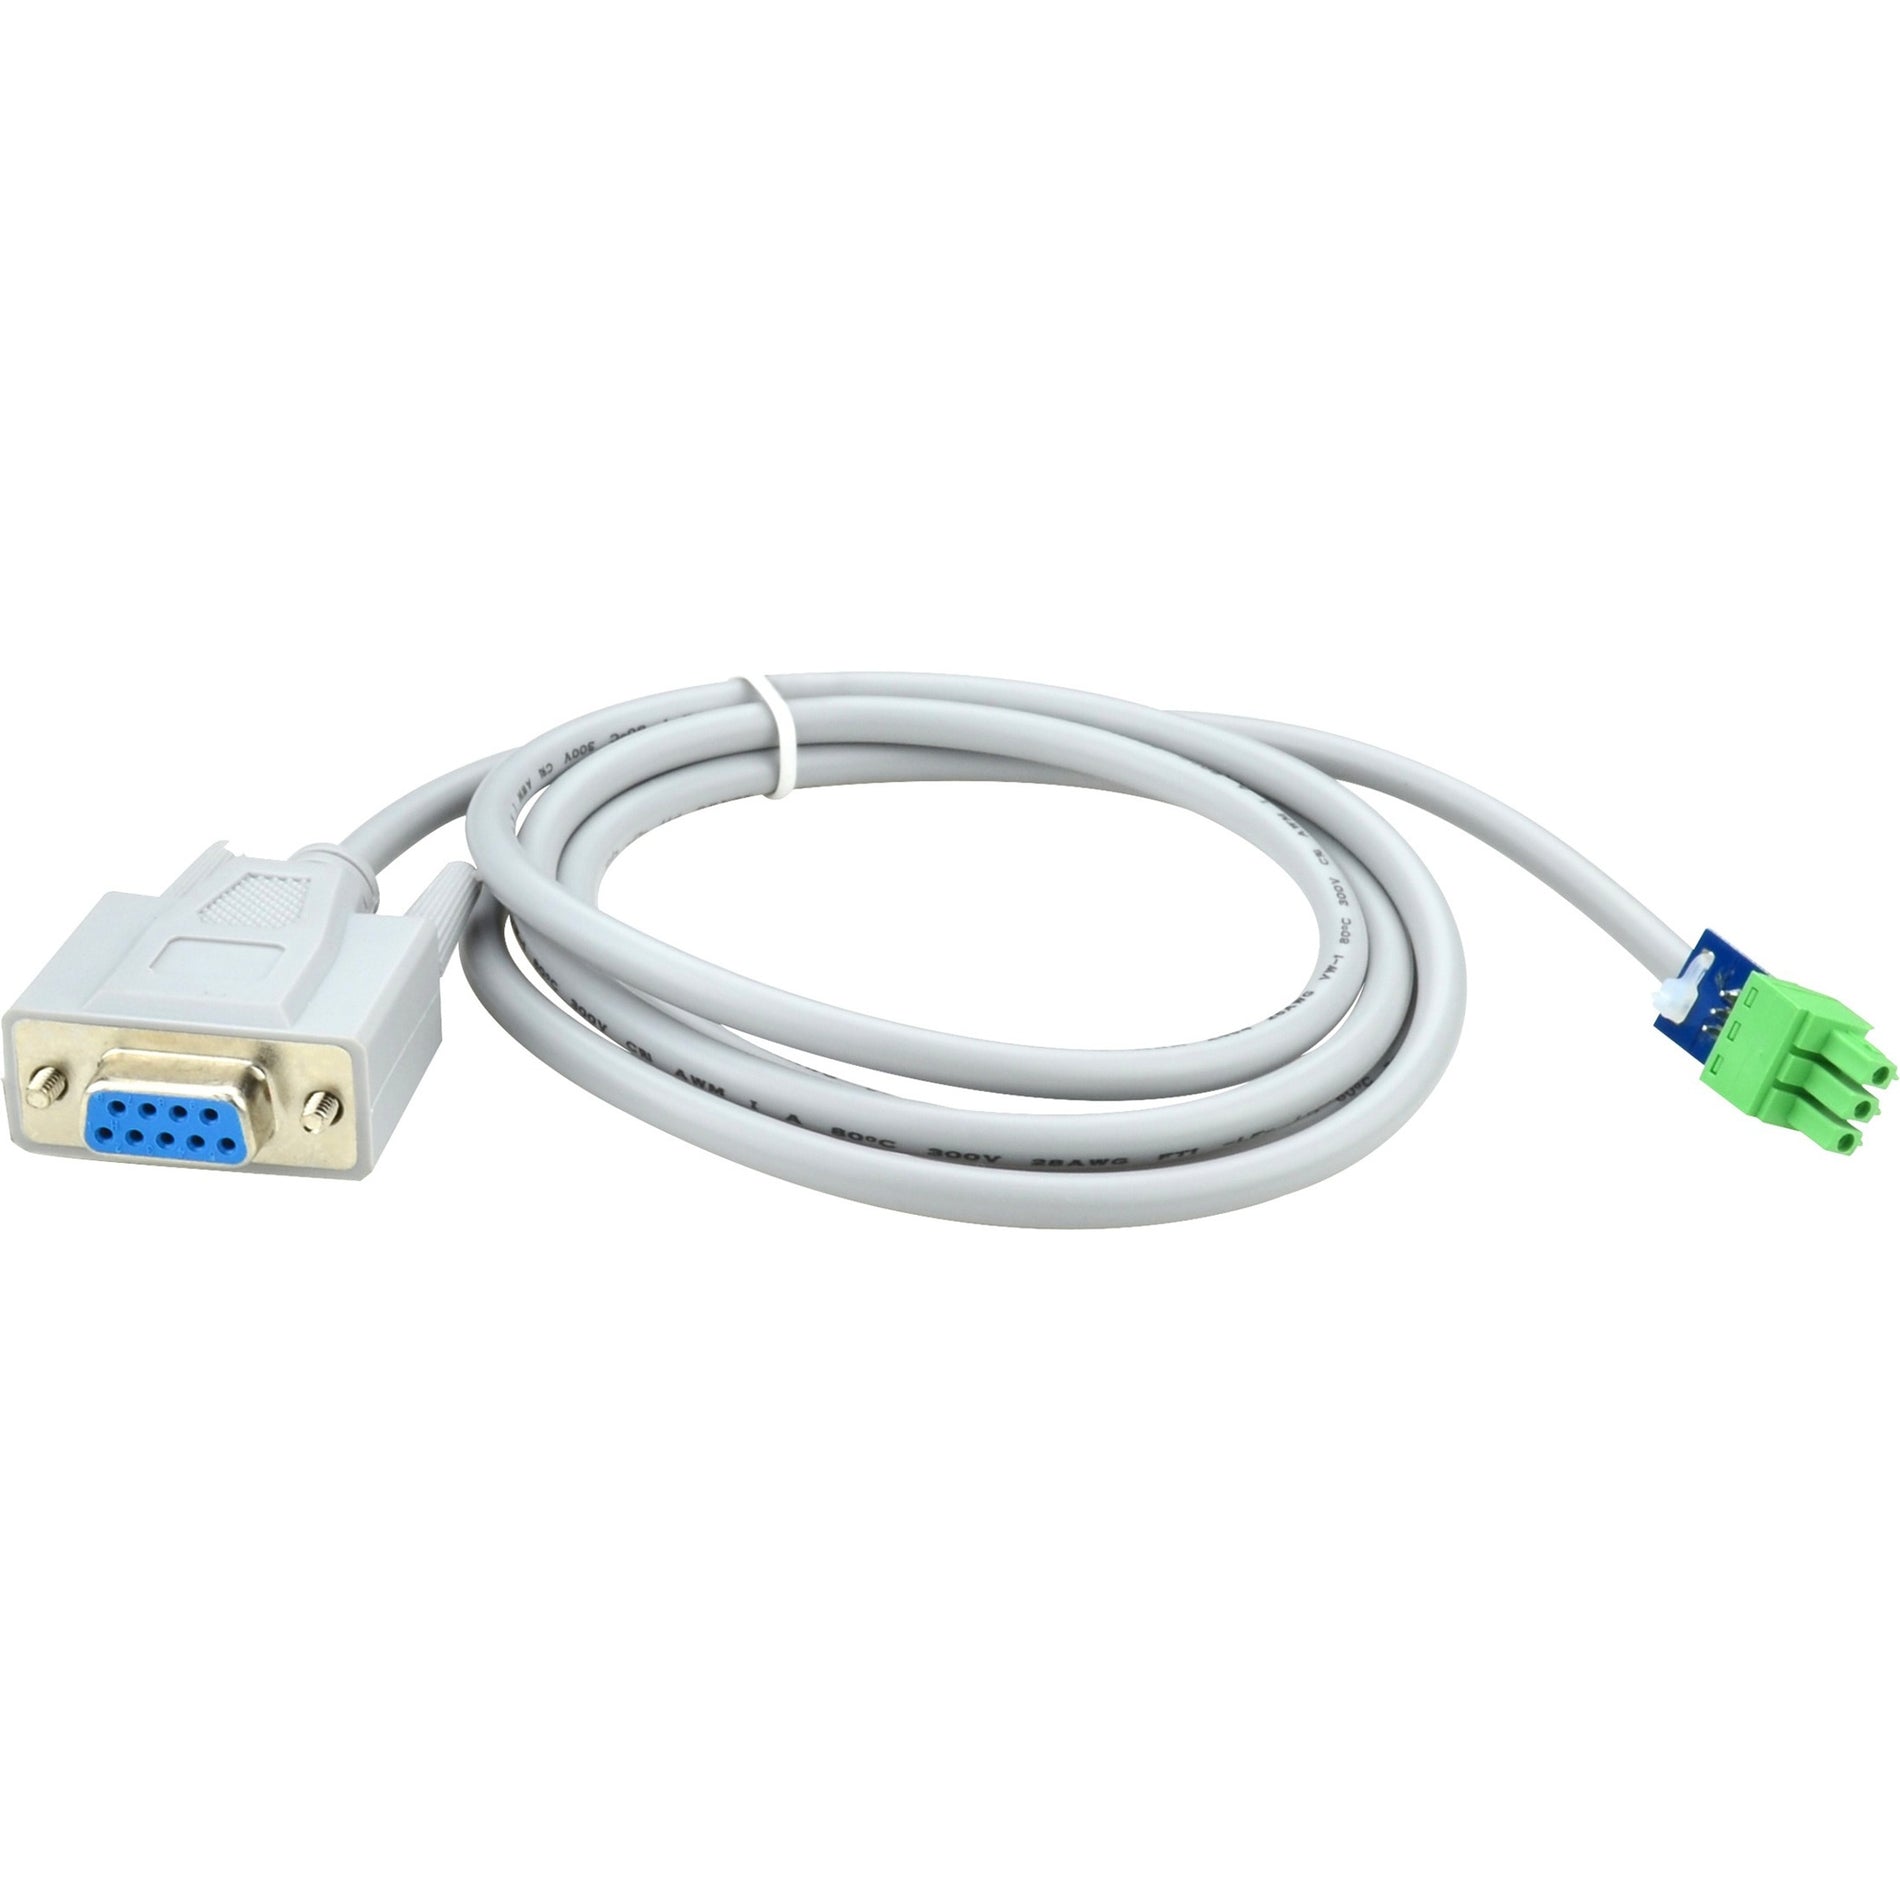 Black Box AVS-CBL-RS232 RS-232 DB9 to Phoenix Adapter Cable - 1.35 m, Data Transfer Cable